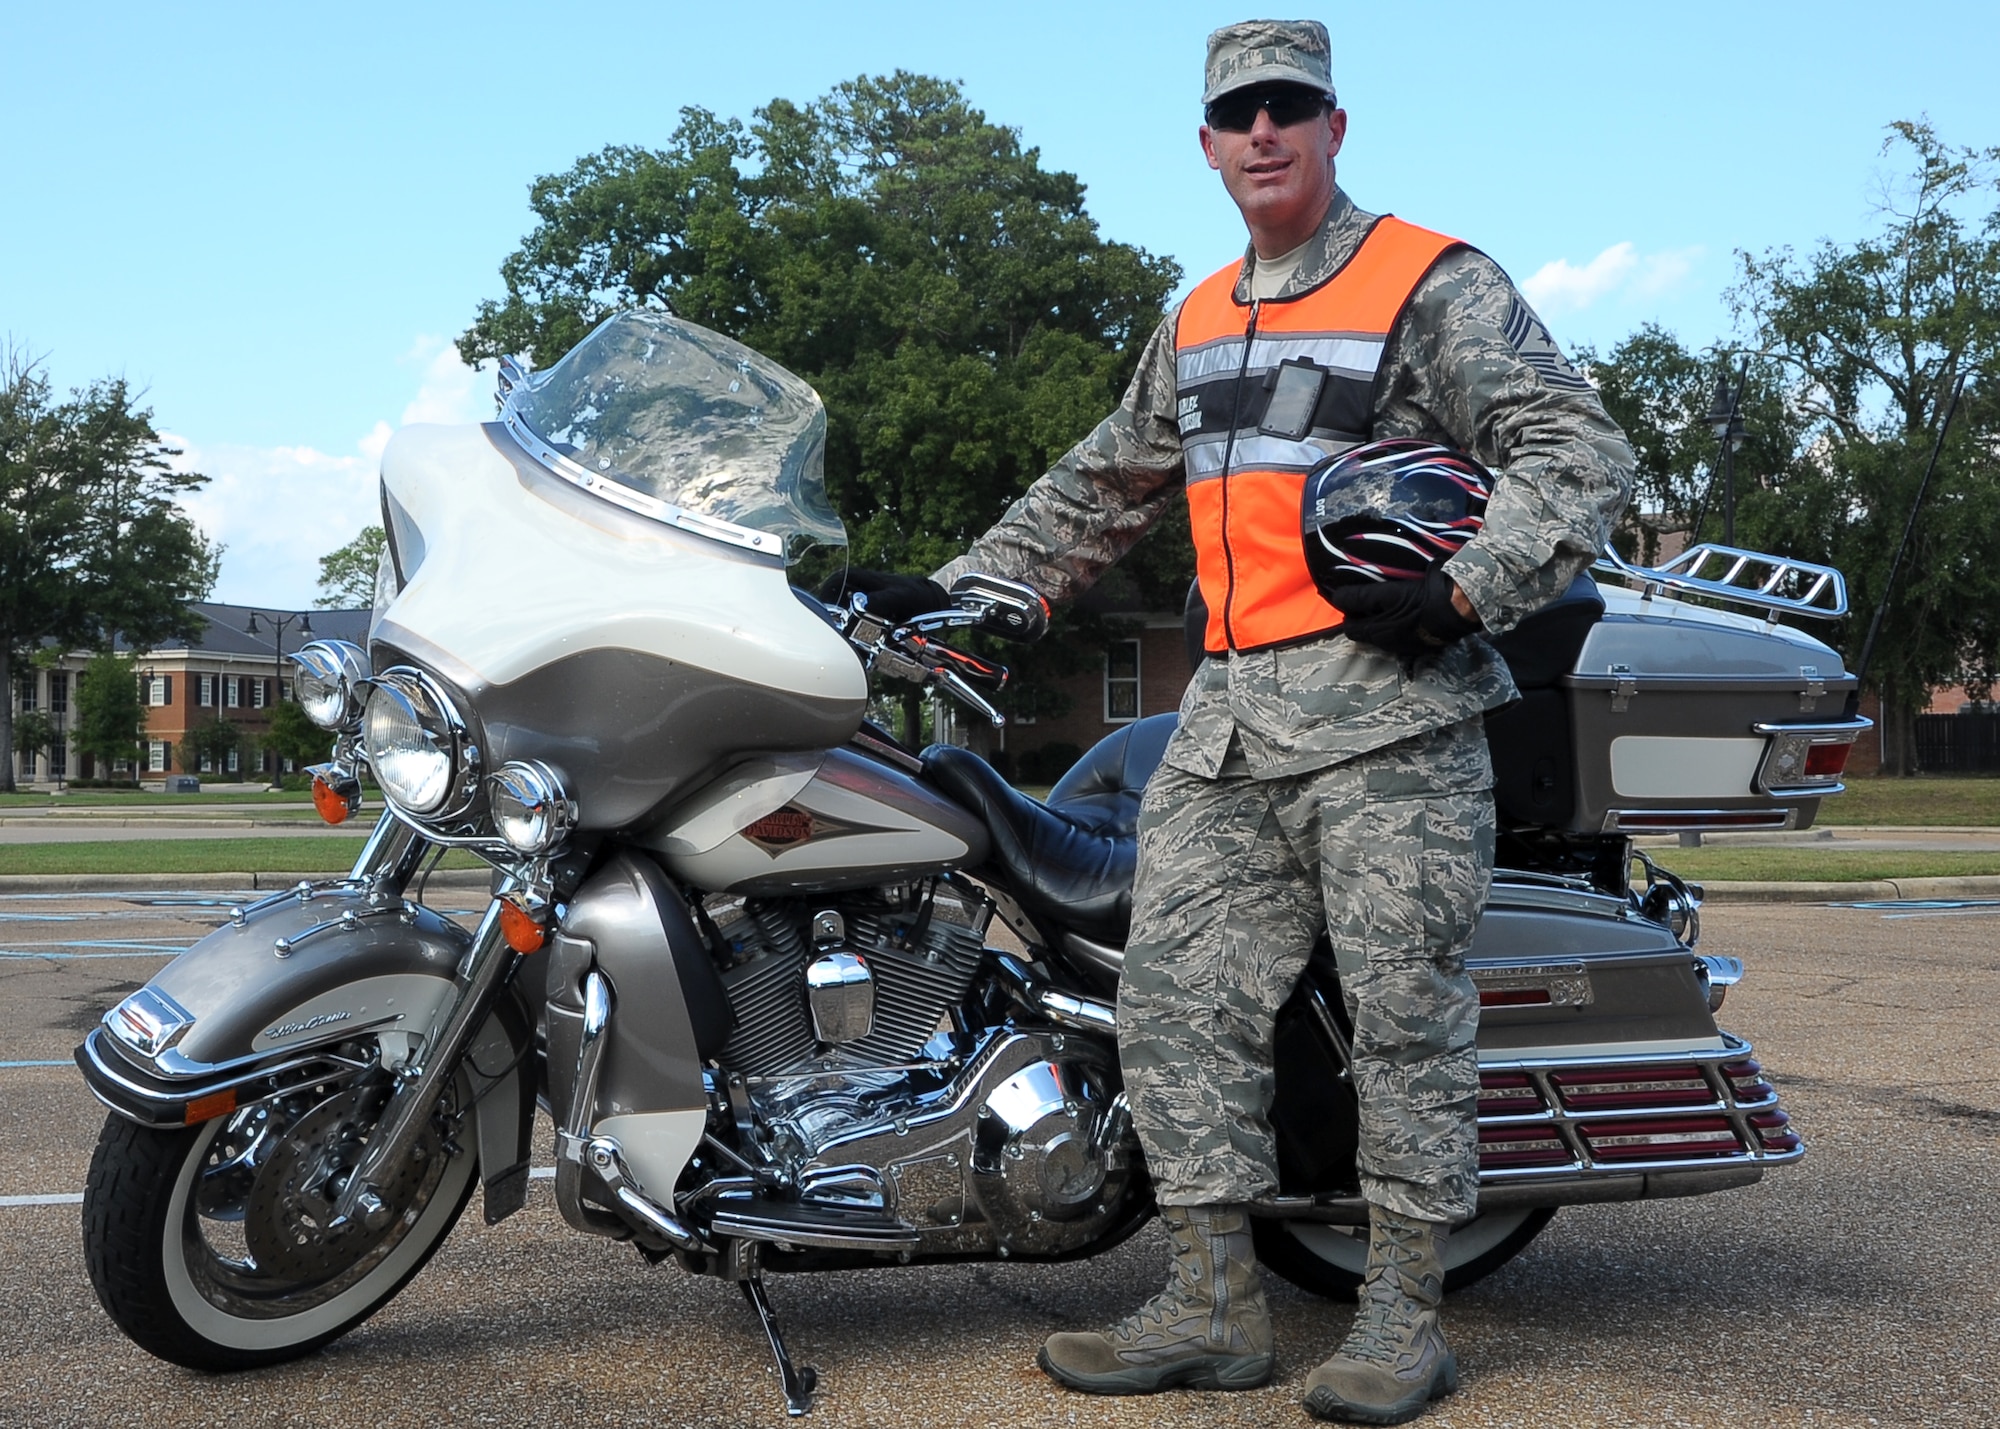 Chief Master Sergeant Vance Kondon, 14th Flying Training Wing Command Chief, stands by his Harley Davidson motorcycle Sep. 24 on Columbus AFB. Kondon wears all the proper personal protective equipment including pants, long sleeve shirt, reflective vest, over-the-ankle shoes, gloves and a Department of Transportation approved helmet. (U.S. Air Force Photo/Amn Daniel Lile)

